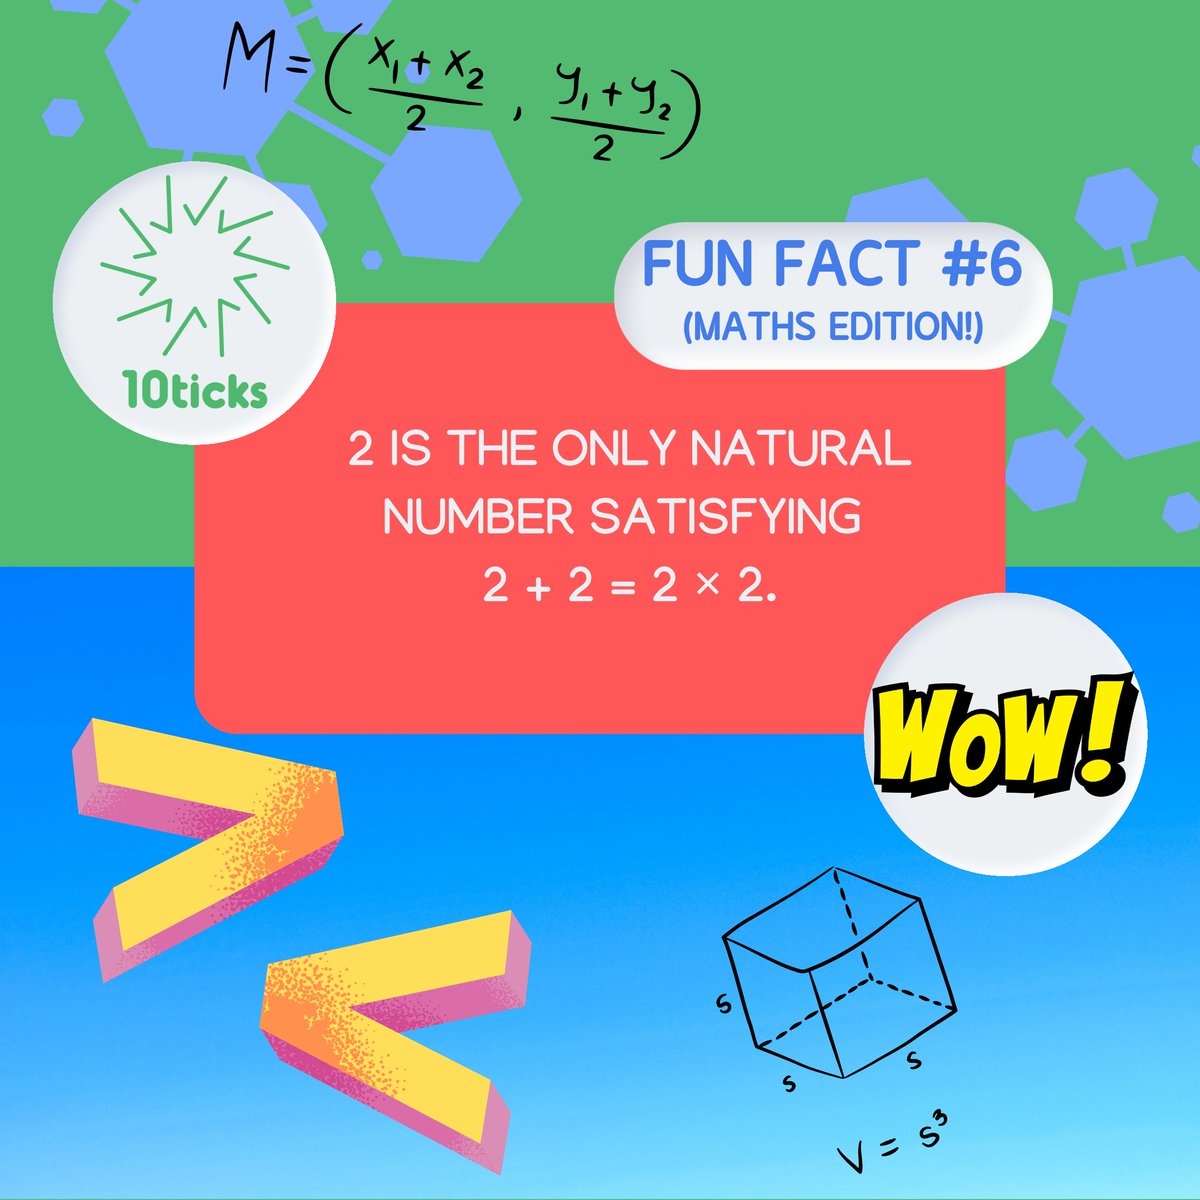 Did you know this maths fact? 🤔 
To gain access to our FREE maths resources, please visit: 10ticks.co.uk/liontrust 

#ukedchat #mathschat #edutwitter #edteach